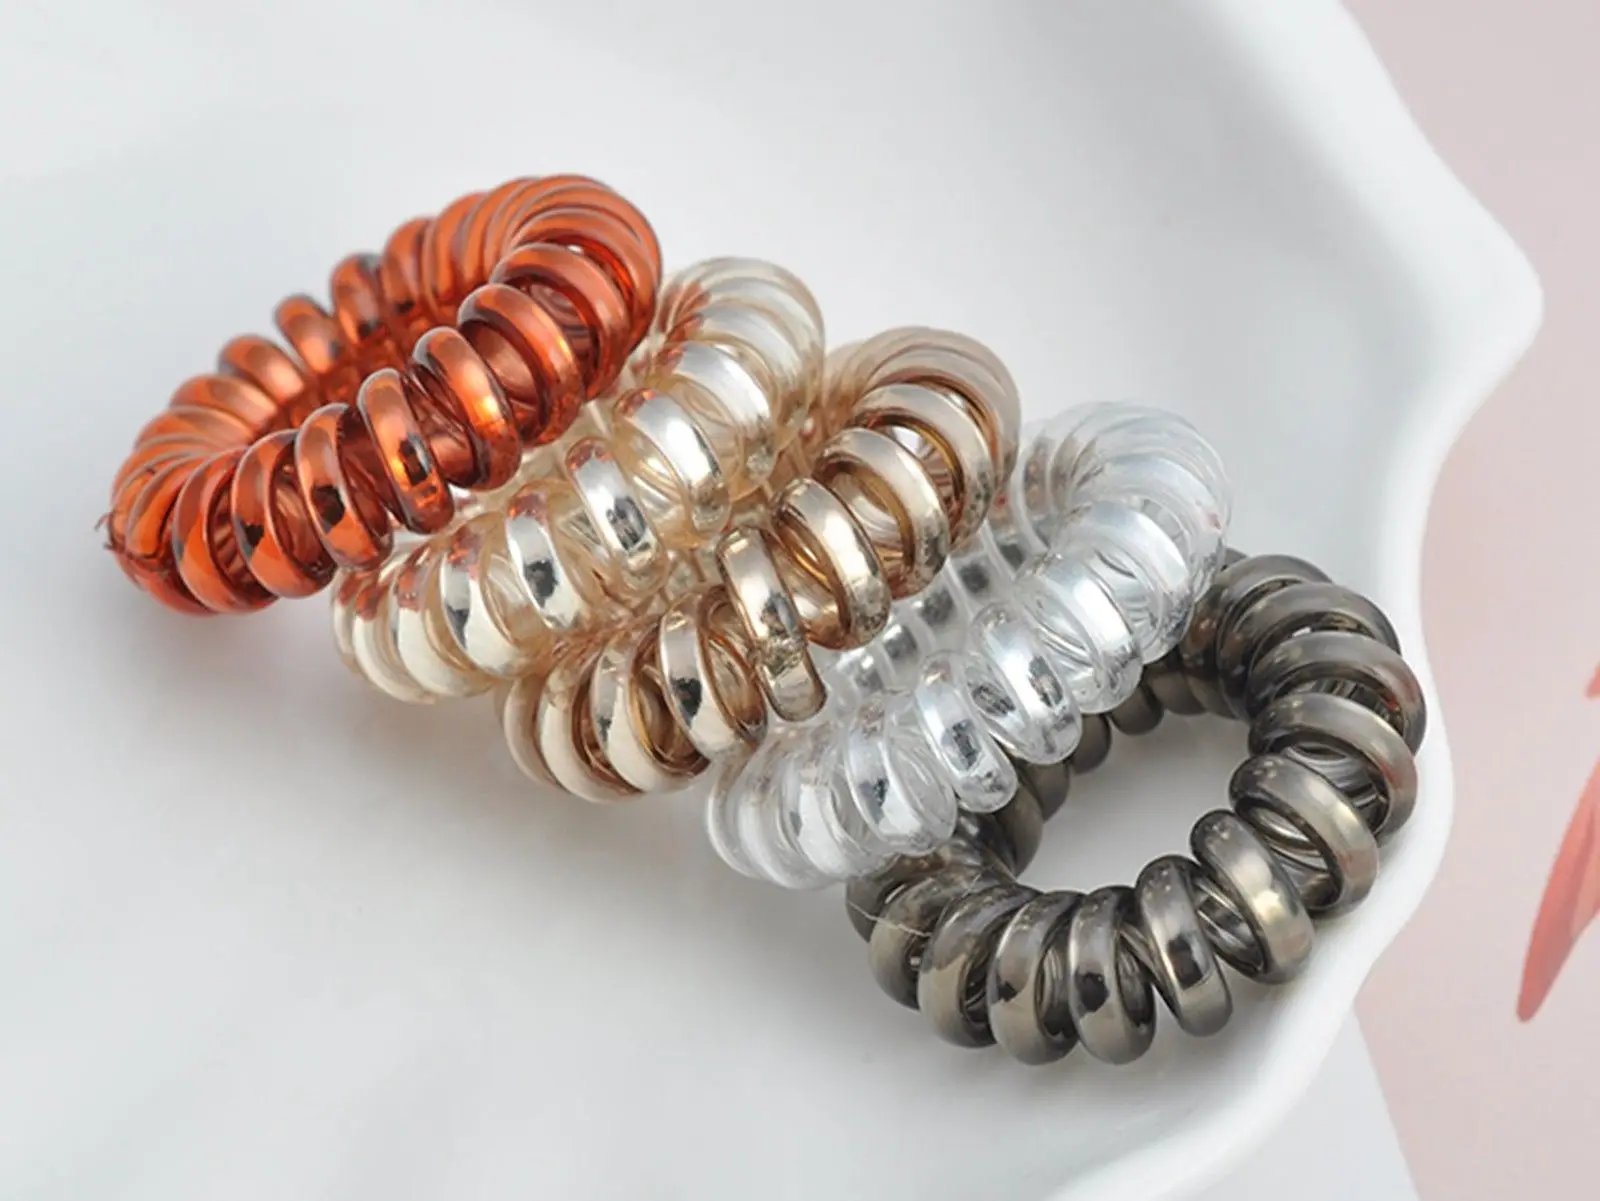 10 Spiral Coil Jelly Elastic Hair Scrunchies Telephone Cord Ponytail Holder 36mm